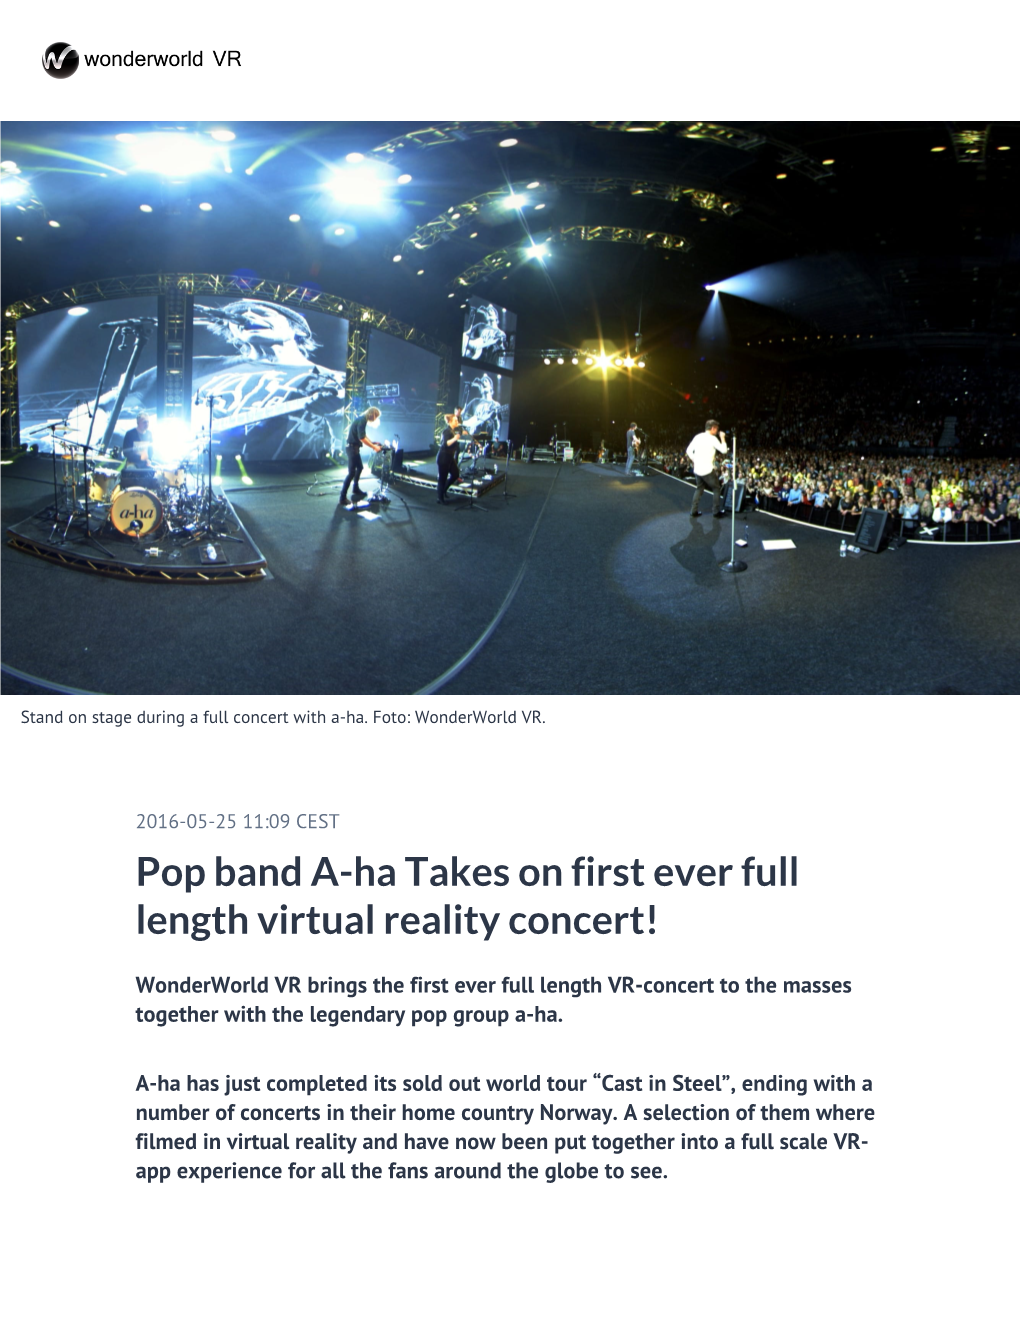 Pop Band A-Ha Takes on First Ever Full Length Virtual Reality Concert!